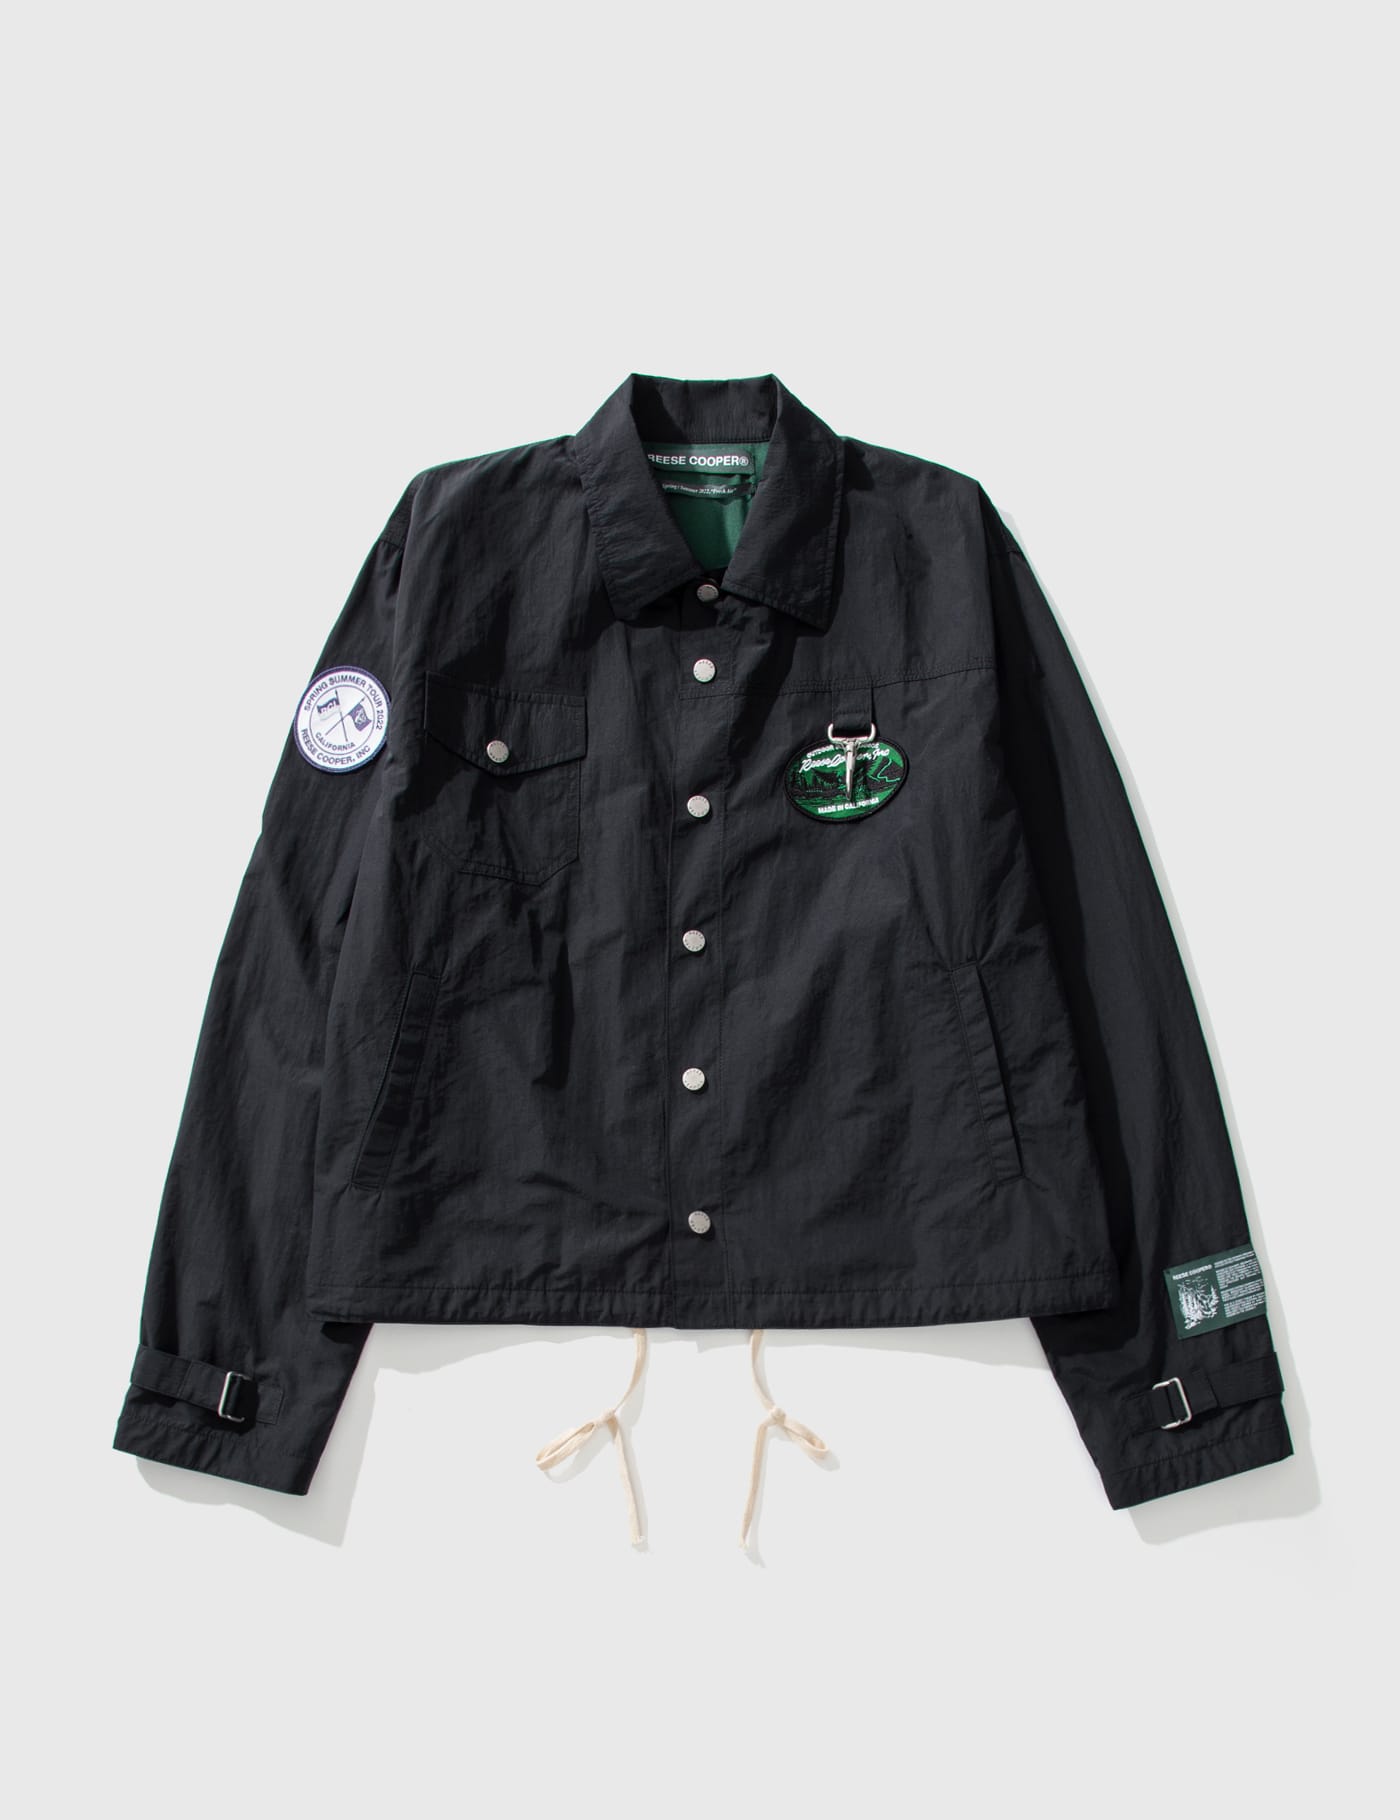 Reese Cooper Patched Nylon Coaches Jacket